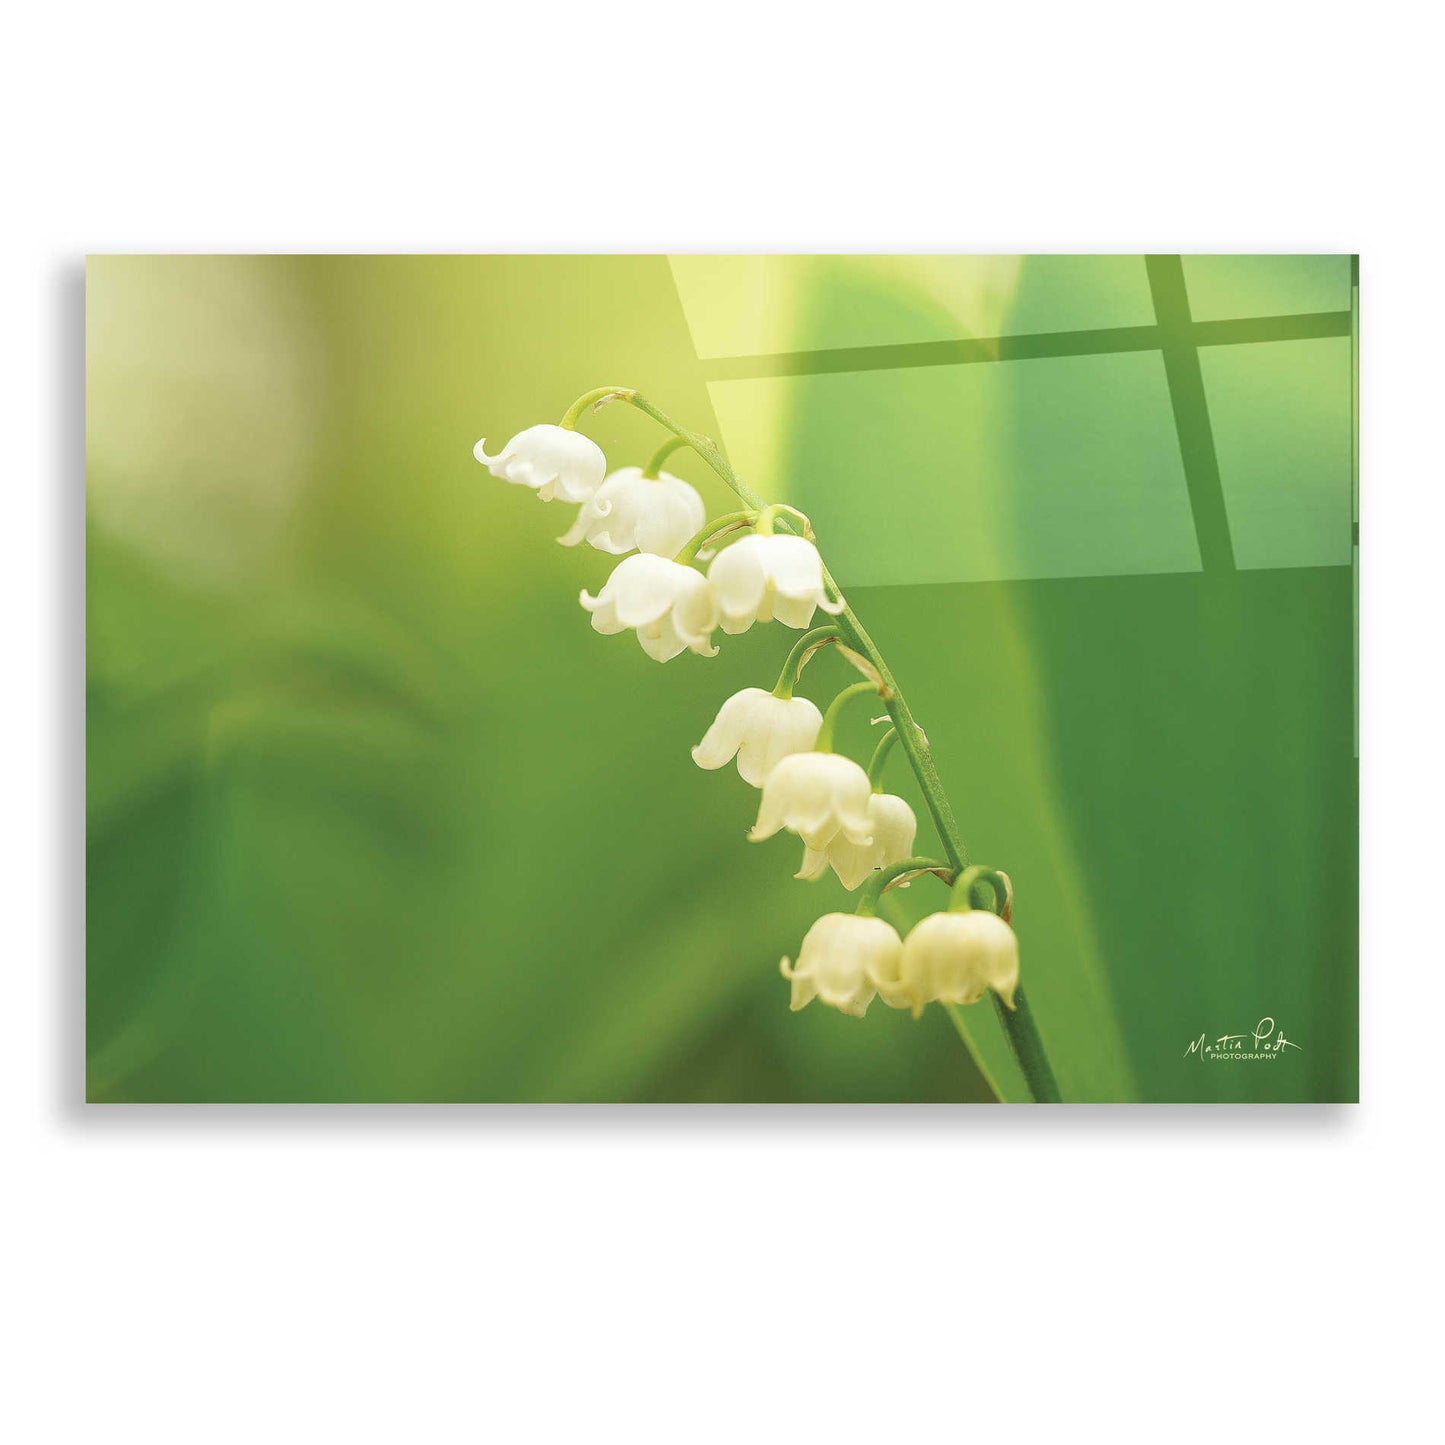 Epic Art 'Lily of the Valley' by Martin Podt, Acrylic Glass Wall Art,24x16